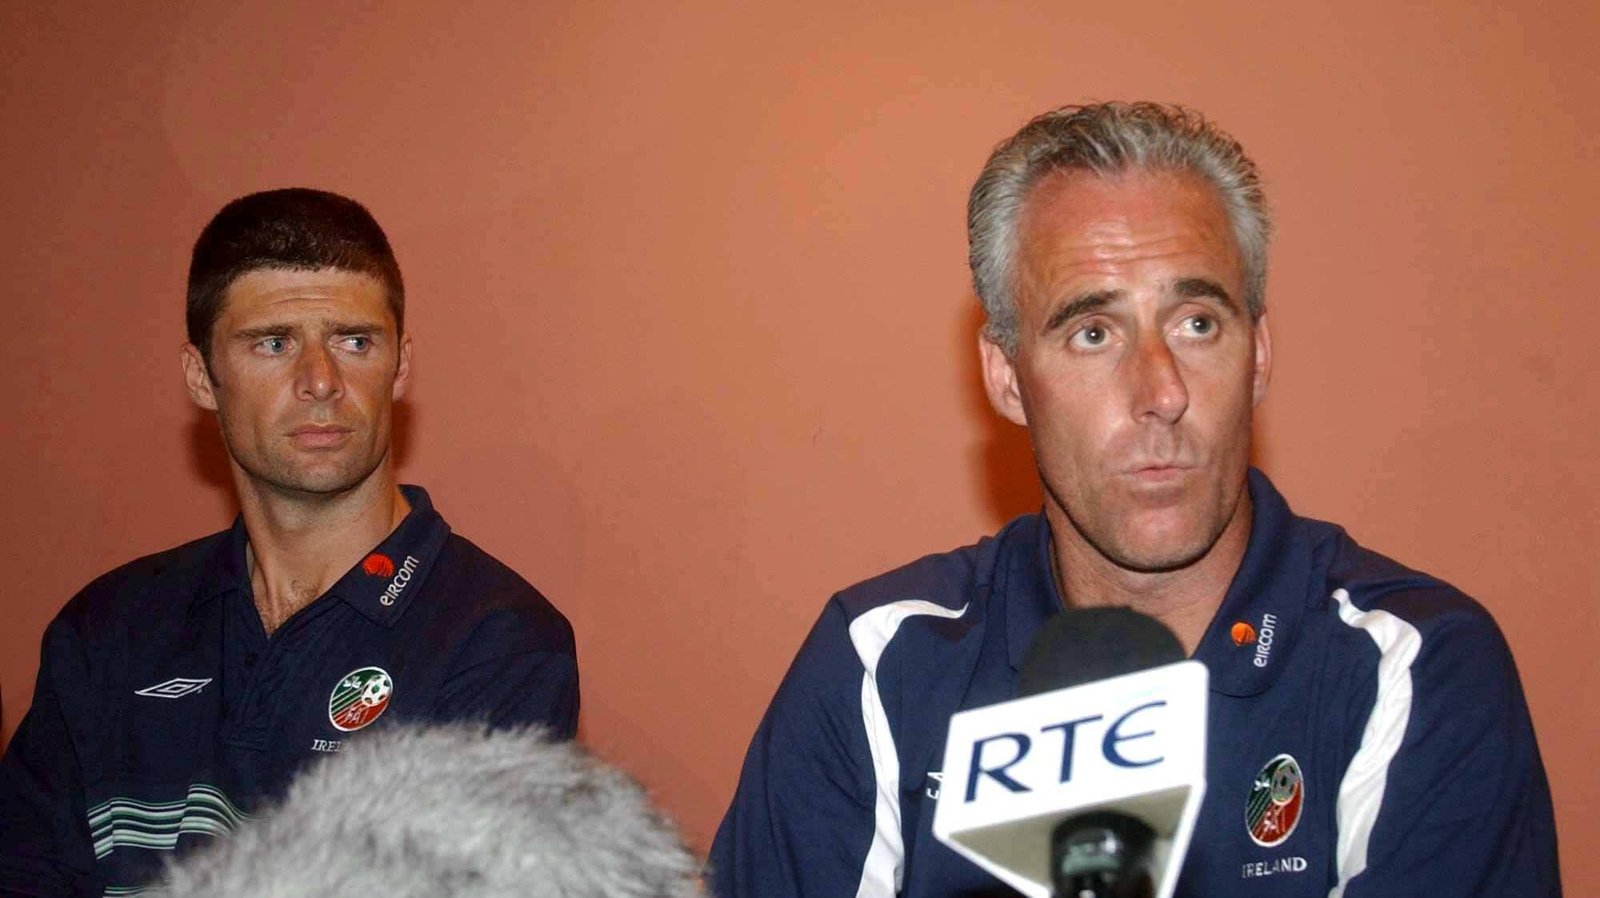 Image - Confusion reigned as McCarthy and players scrambled to react to news from the other side of the world